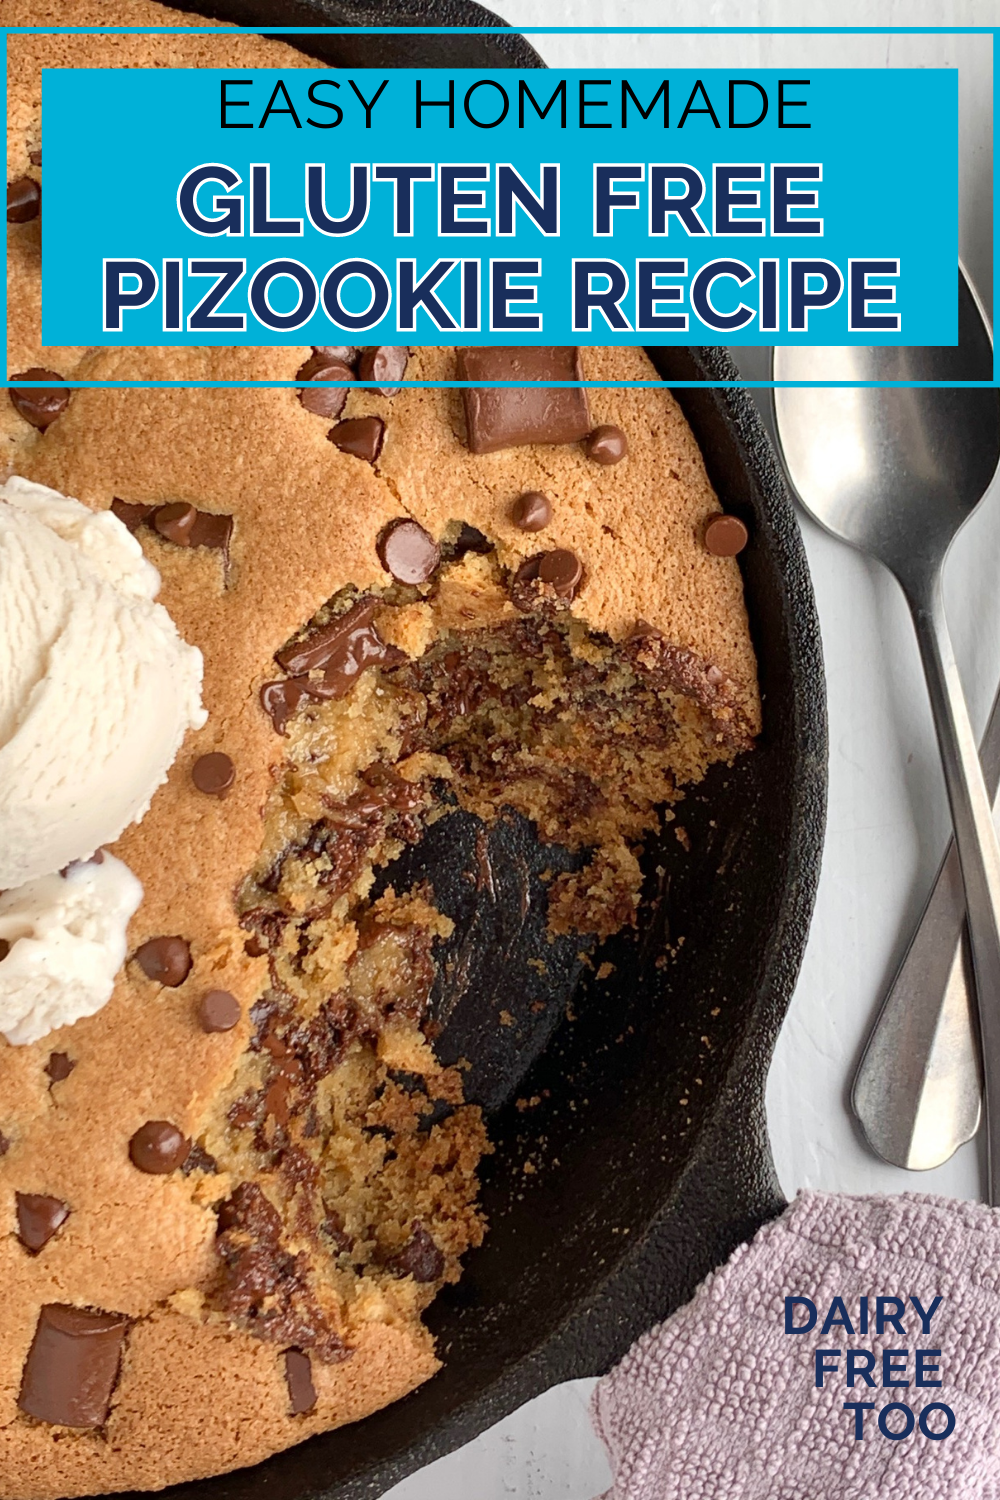 A skillet pizookie with text overlay.